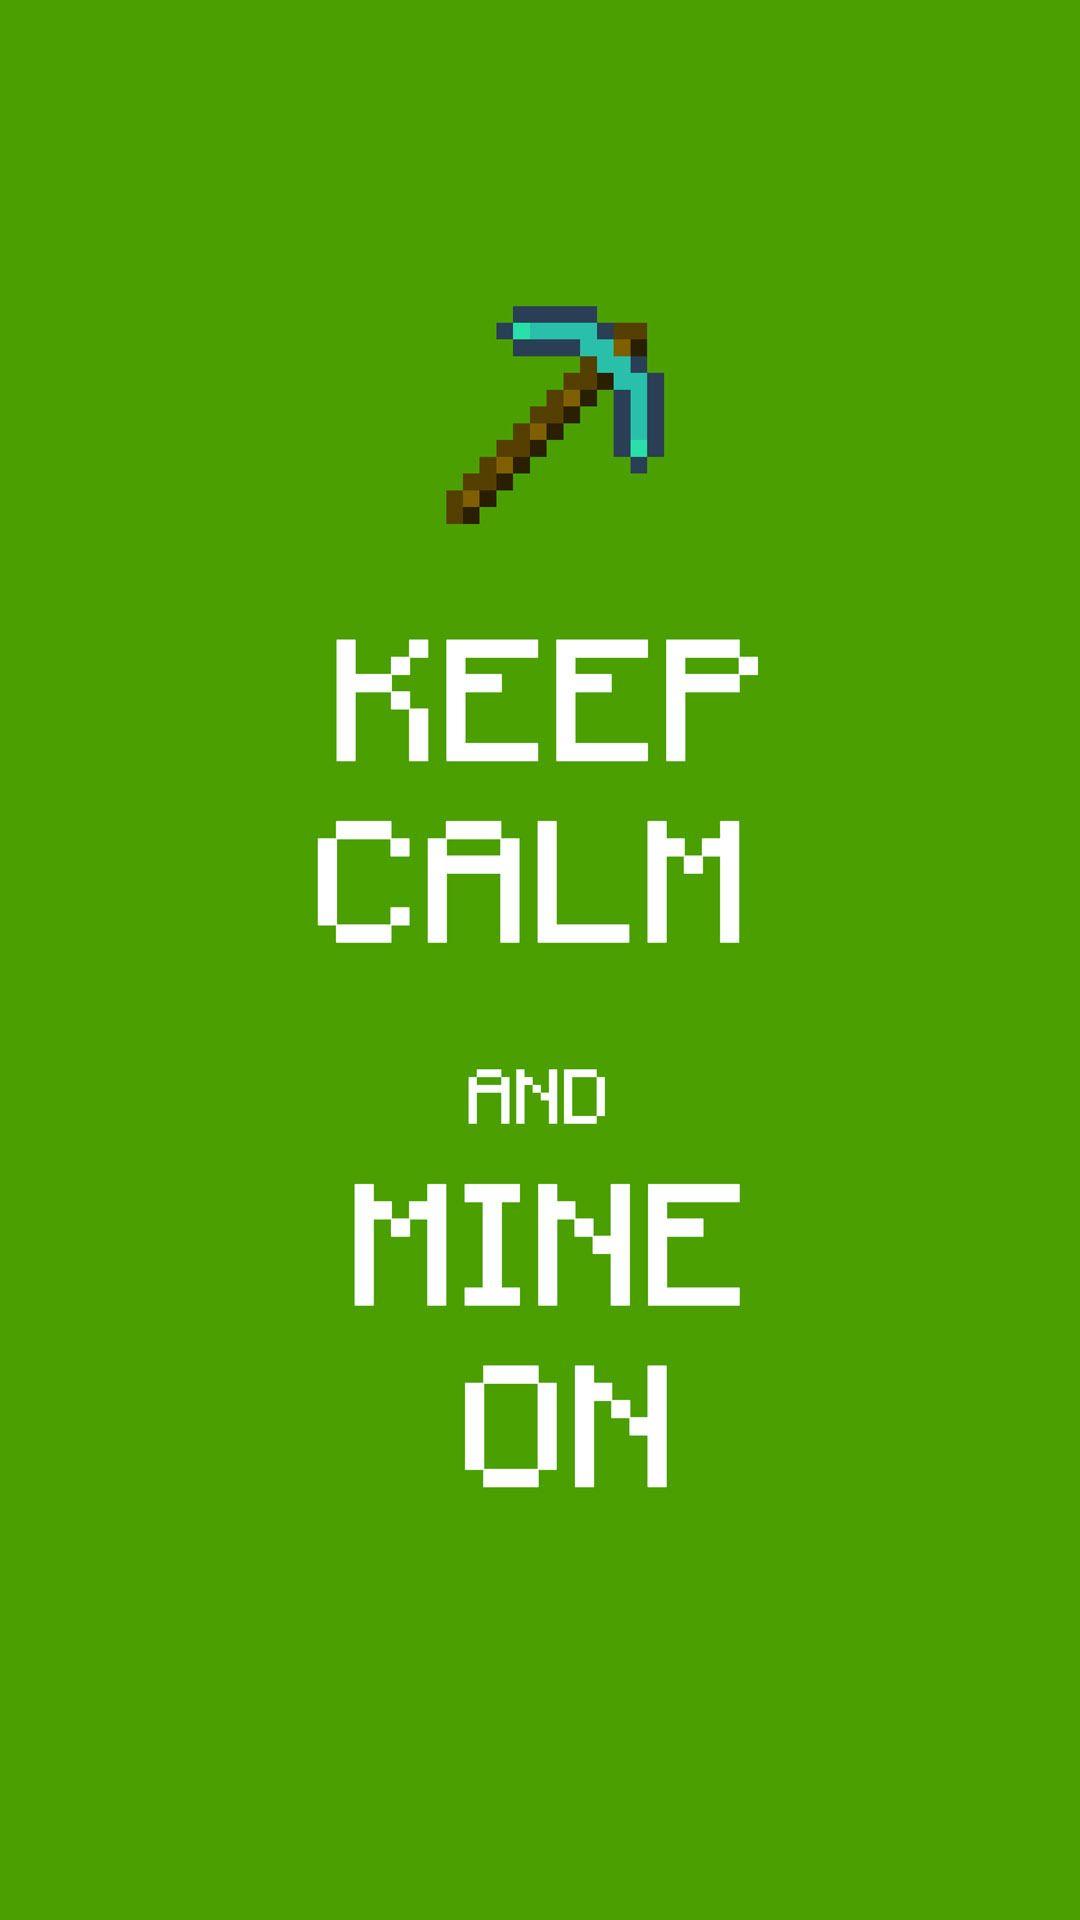 Awesome 9 Minecraft HD iPhone Wallpaper For Your Android or iPhone Wallpaper #android #iphone #wallpaper. Keep calm quotes, Keep calm image, Keep calm picture